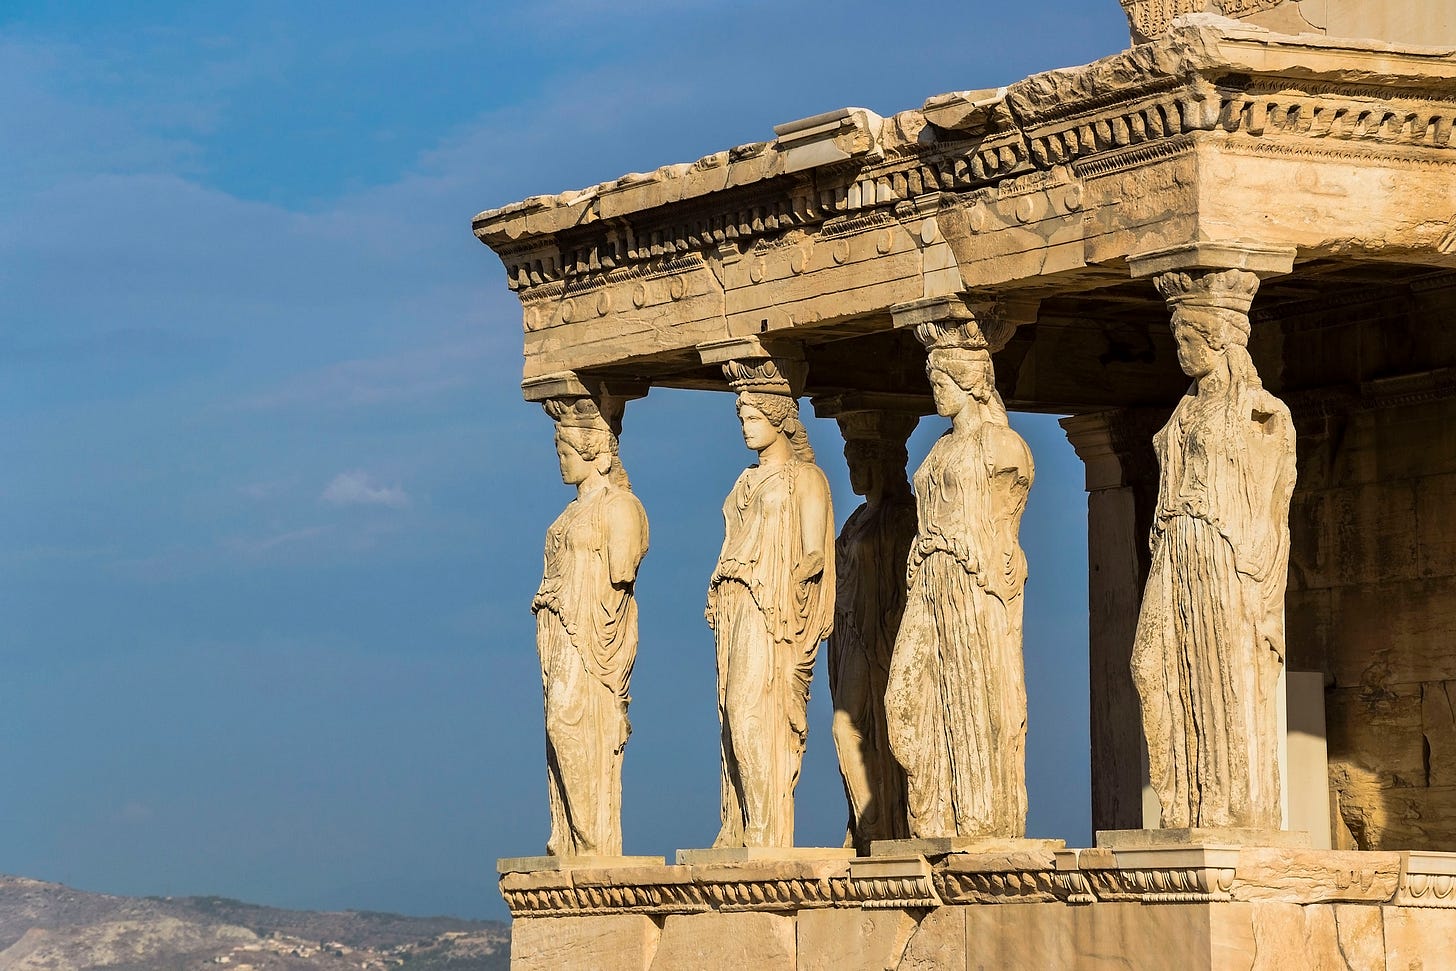 Caryatid statues on the Acropolis in Athens. 